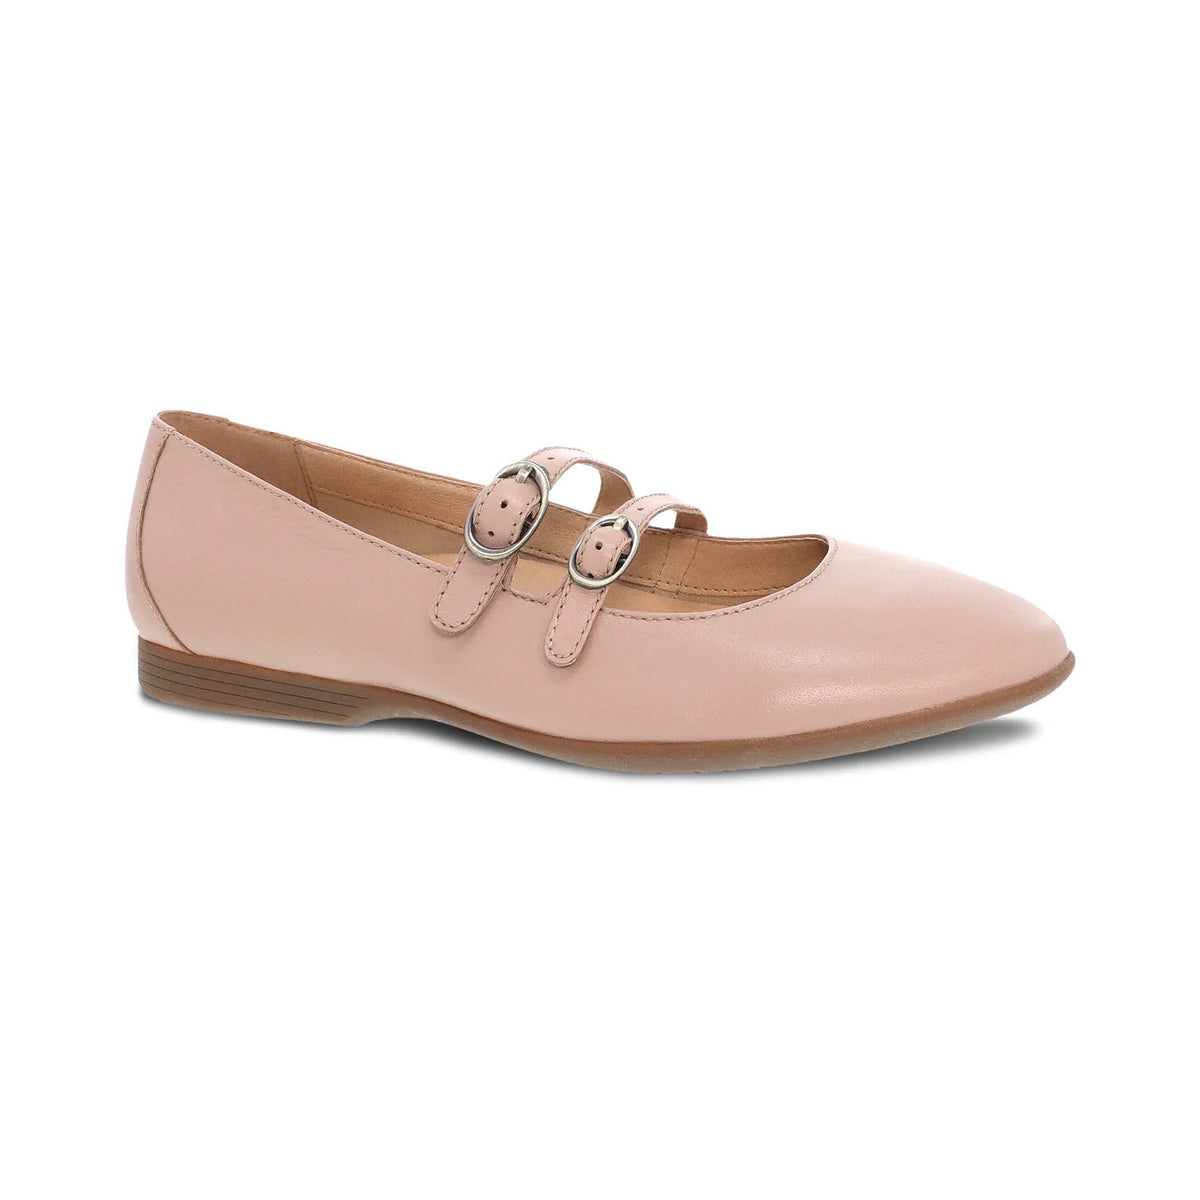 A light pink leather flat shoe with adjustable double buckle straps and a small wooden heel on a white background. - Dansko Leeza Ballet - Womens